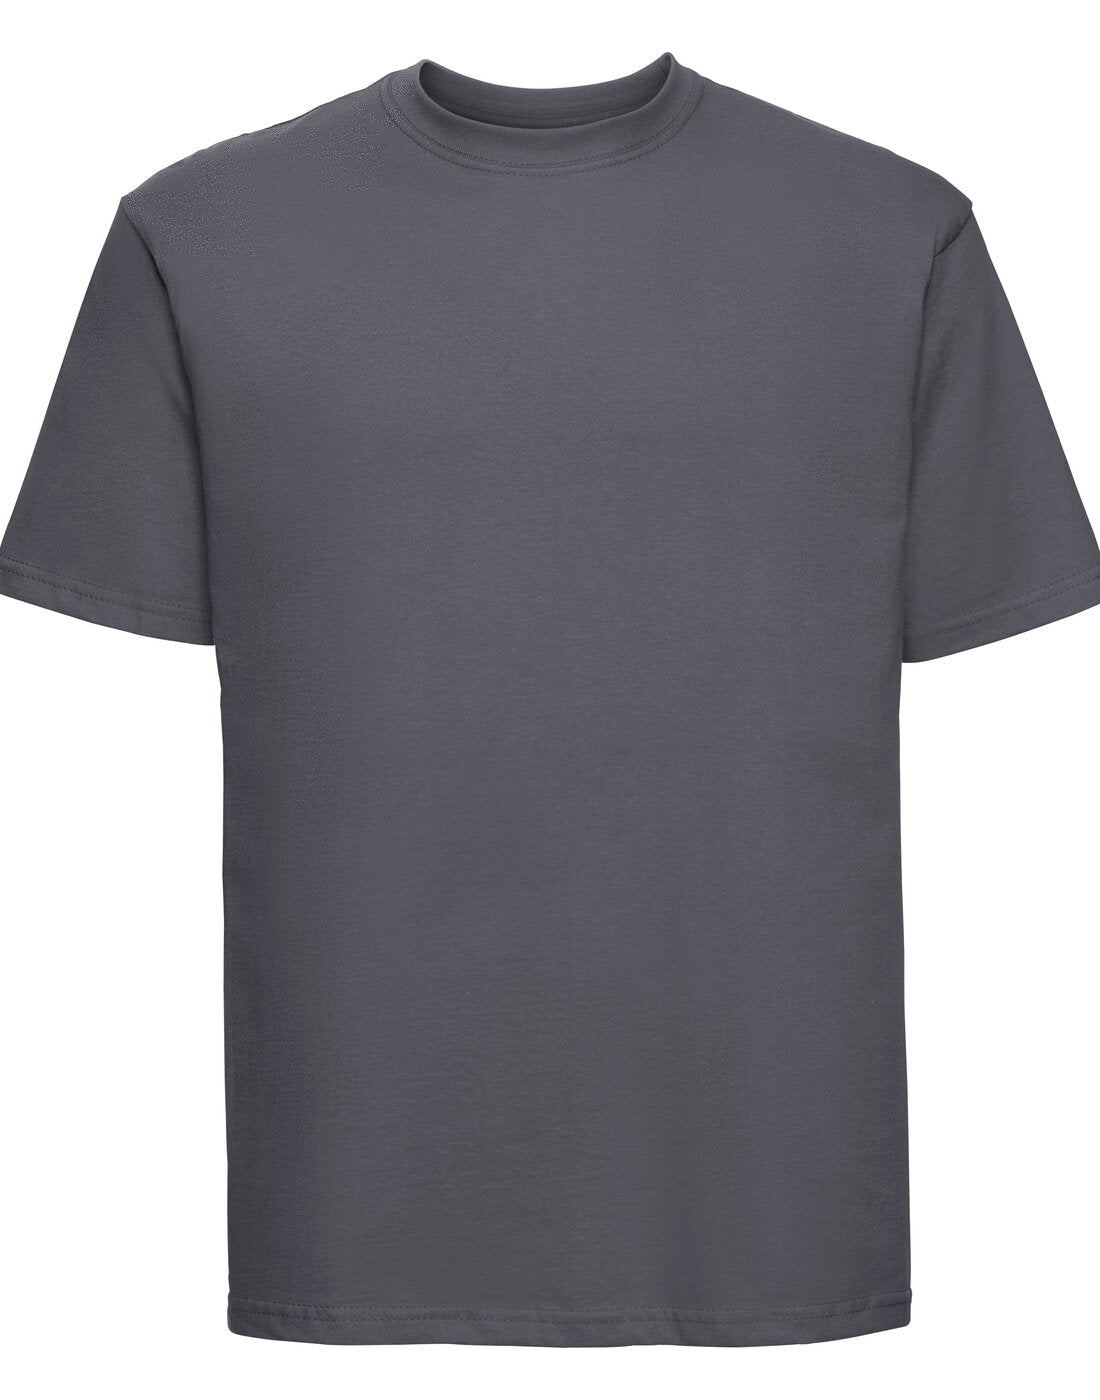 Russell Classic Unisex T-Shirt - Convoy Grey